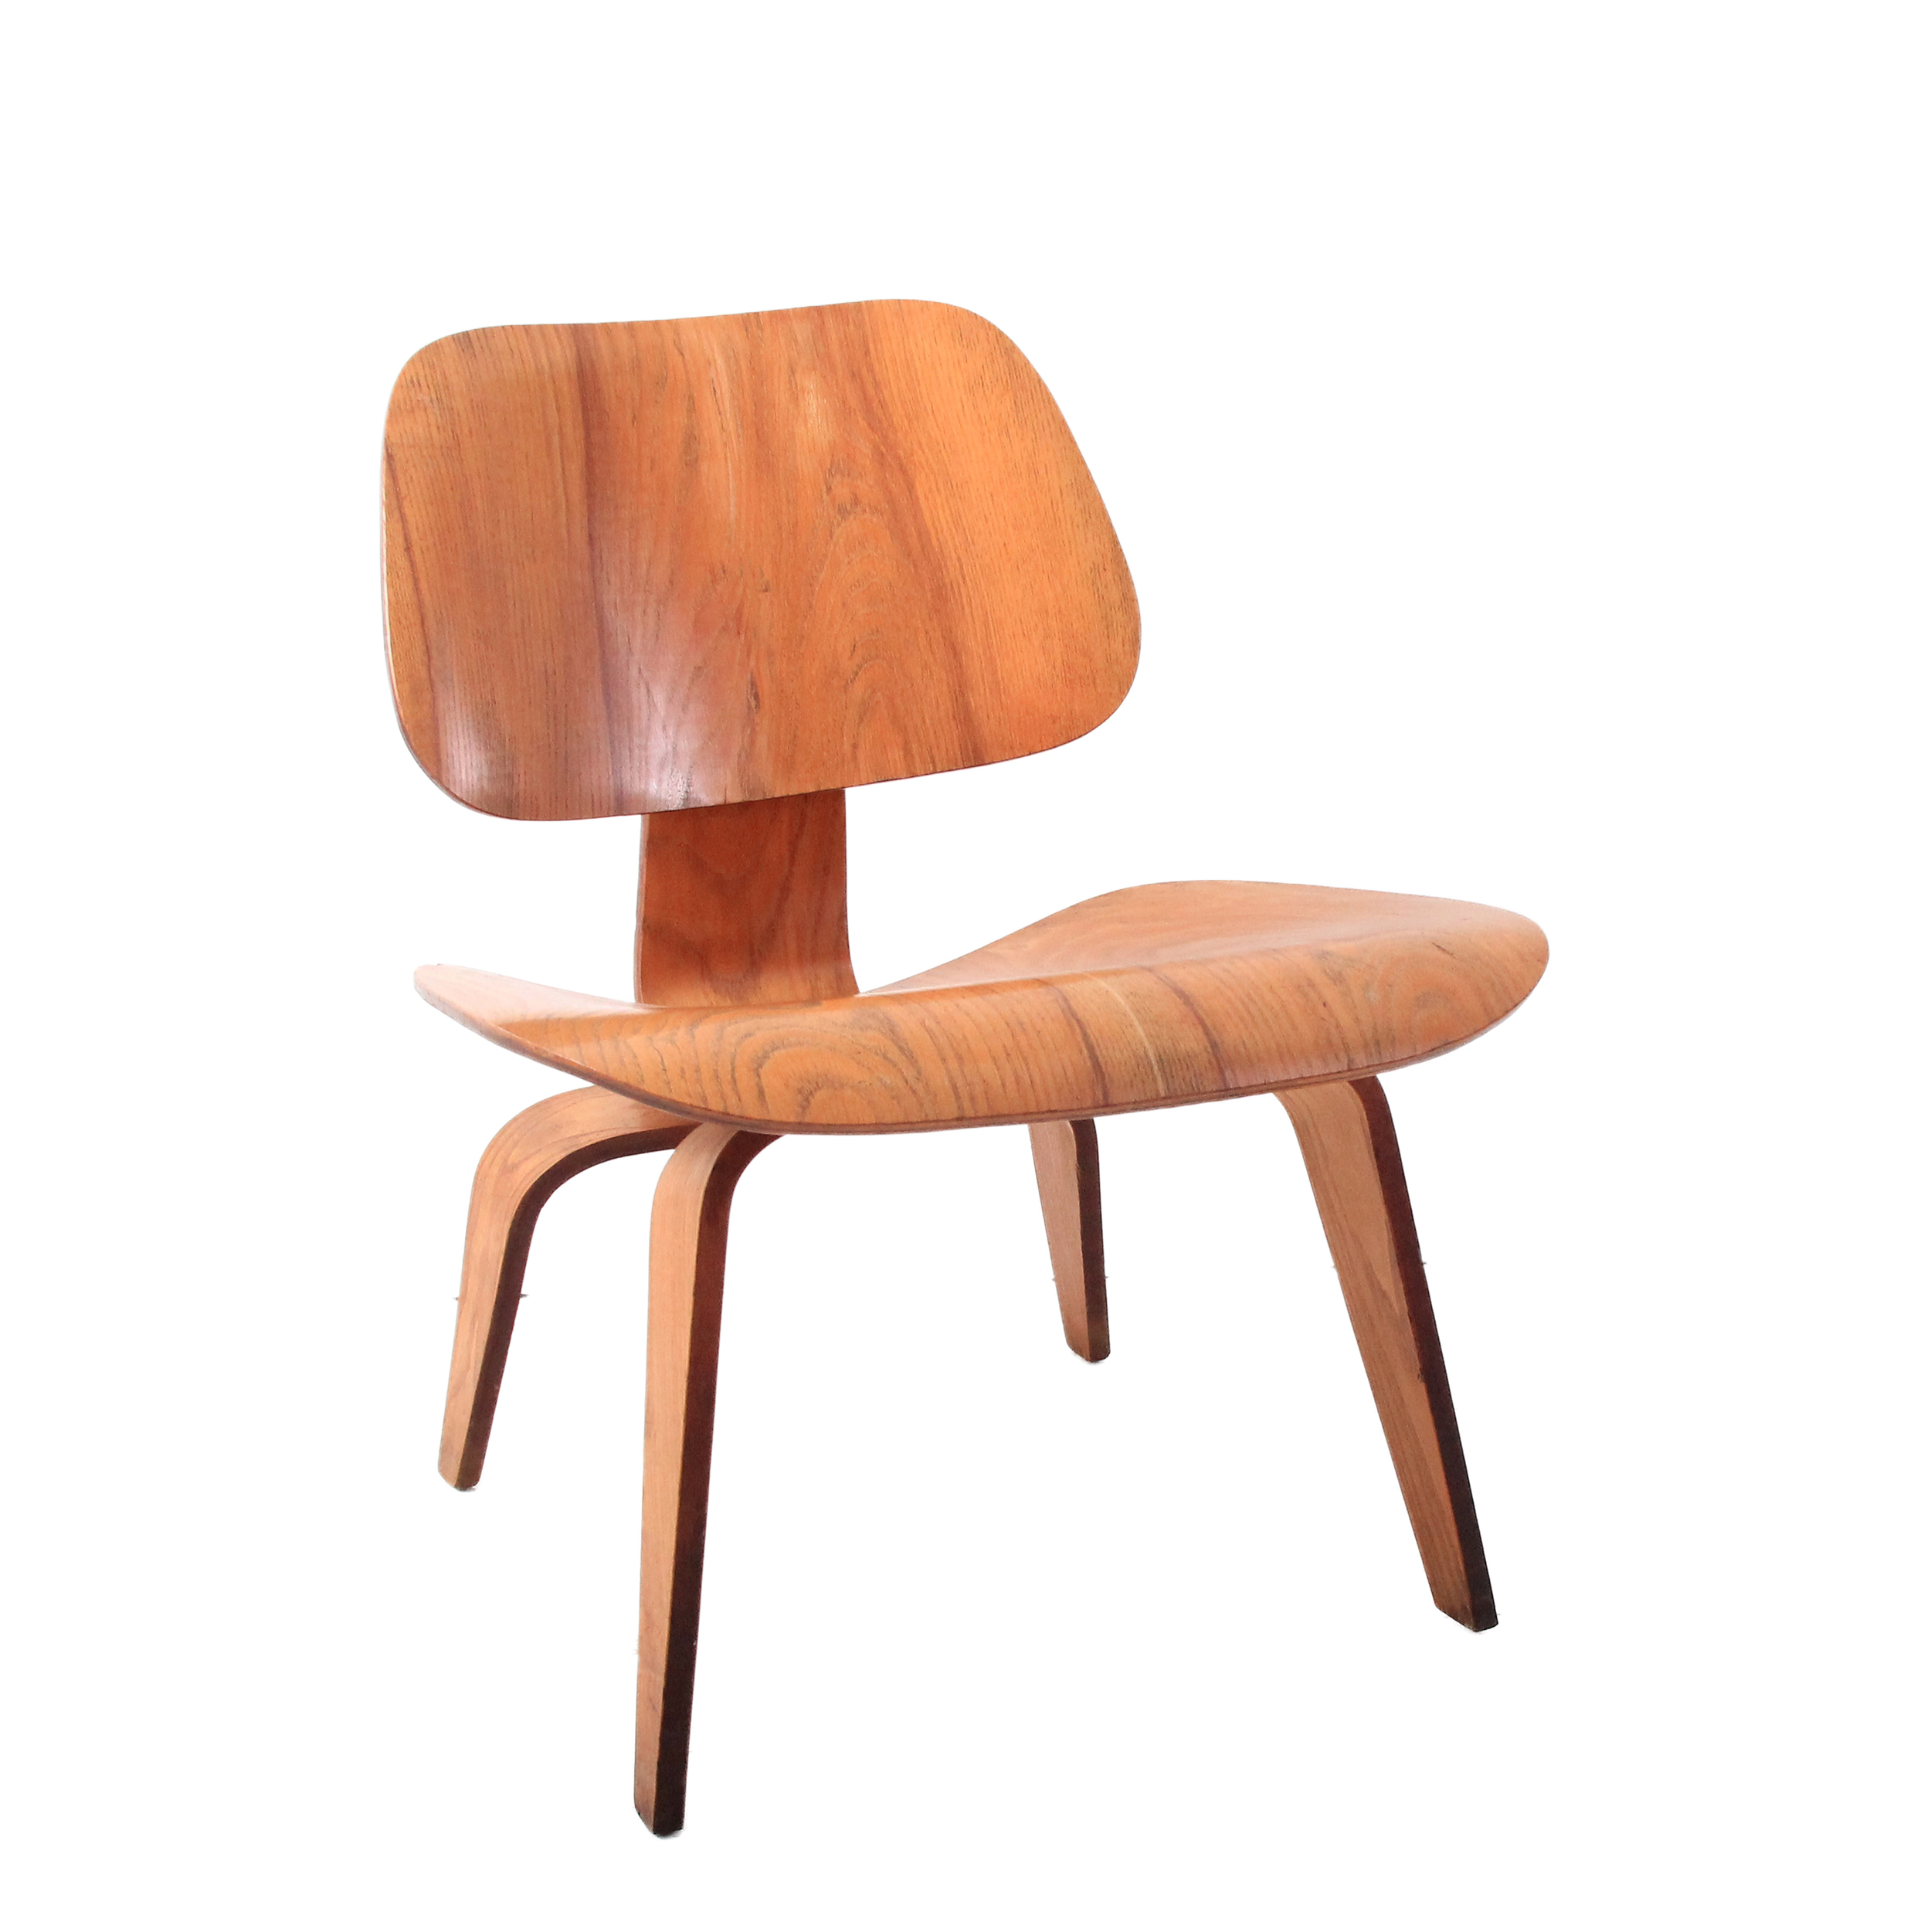 Vintage Eames Plywood Chair